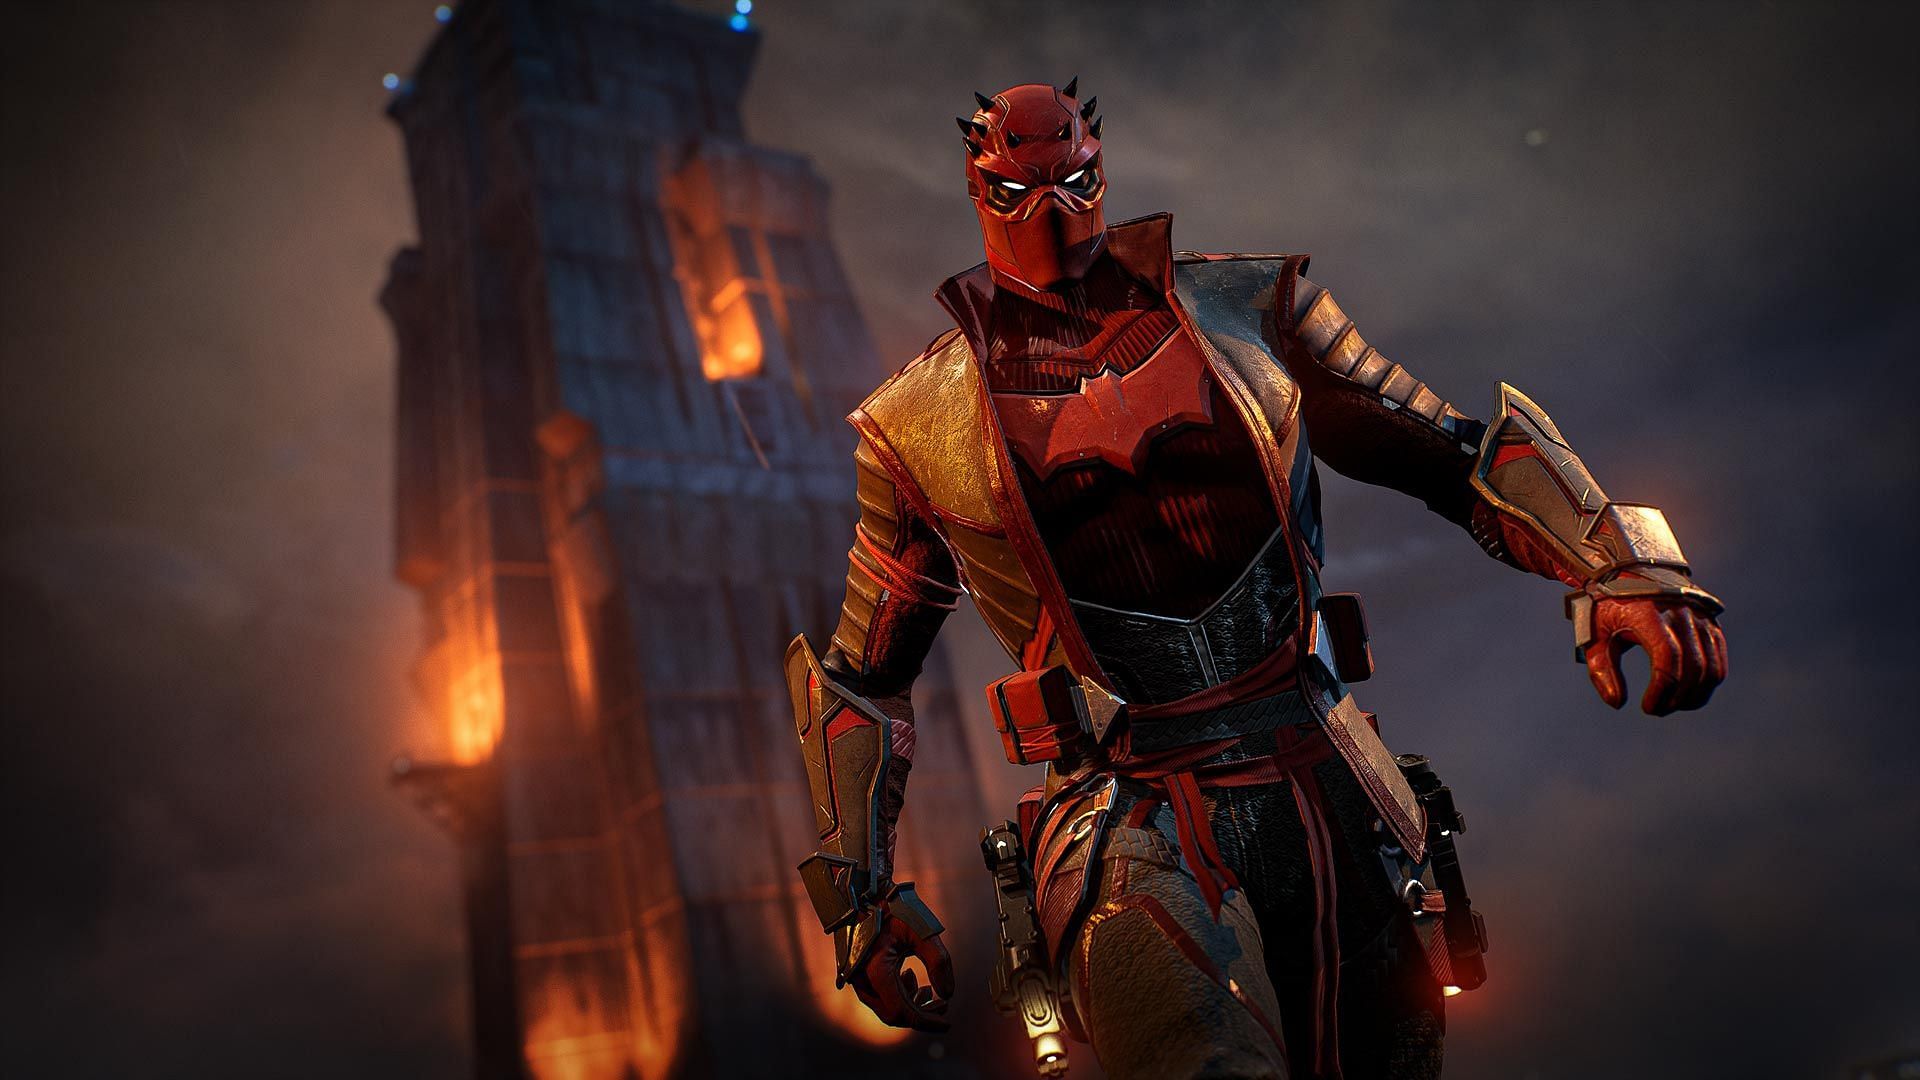 Gotham Knights release date, gameplay, and story